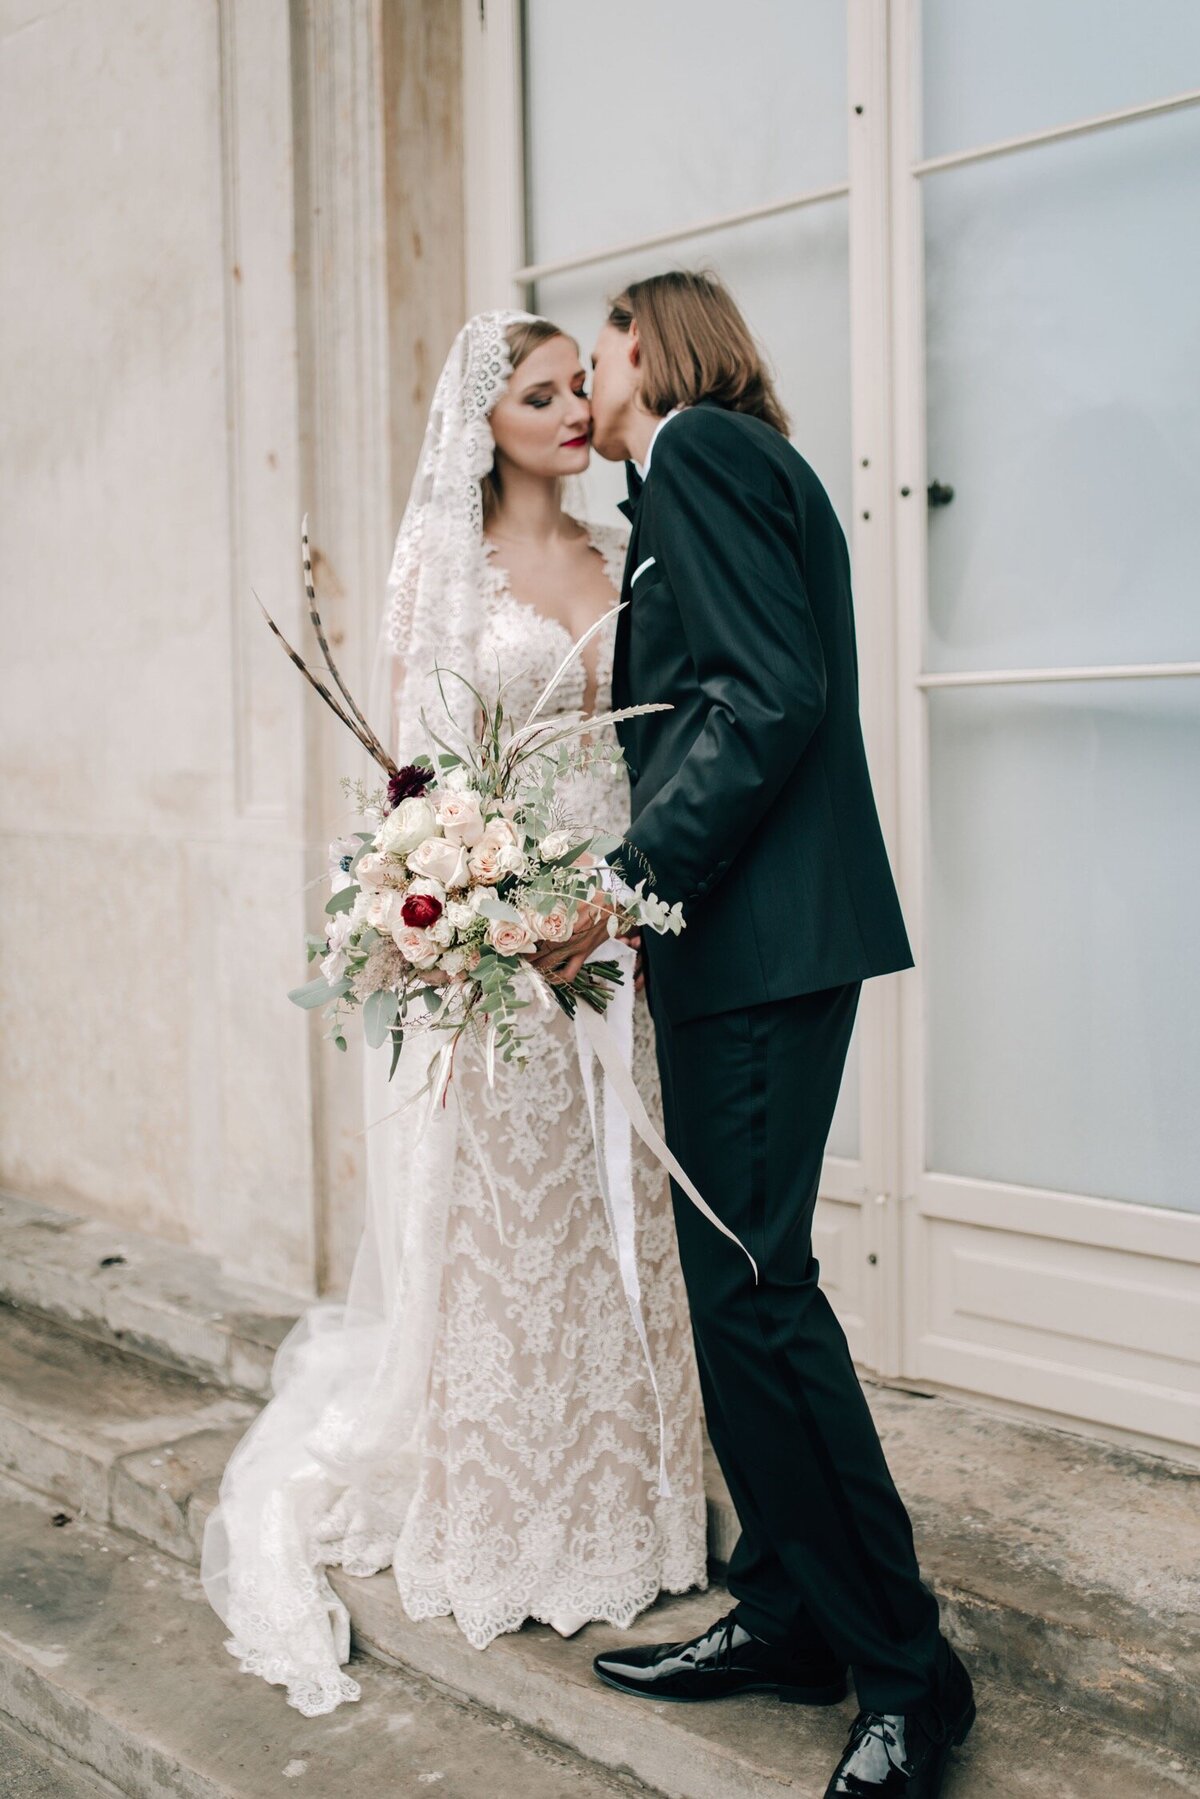 024_Flora_And_Grace_Europe_Fine_Art_Wedding_Photographer-219_A sophisticated fine art wedding in Europe with an editorial edge captured by Vogue wedding photographer Flora and Grace.